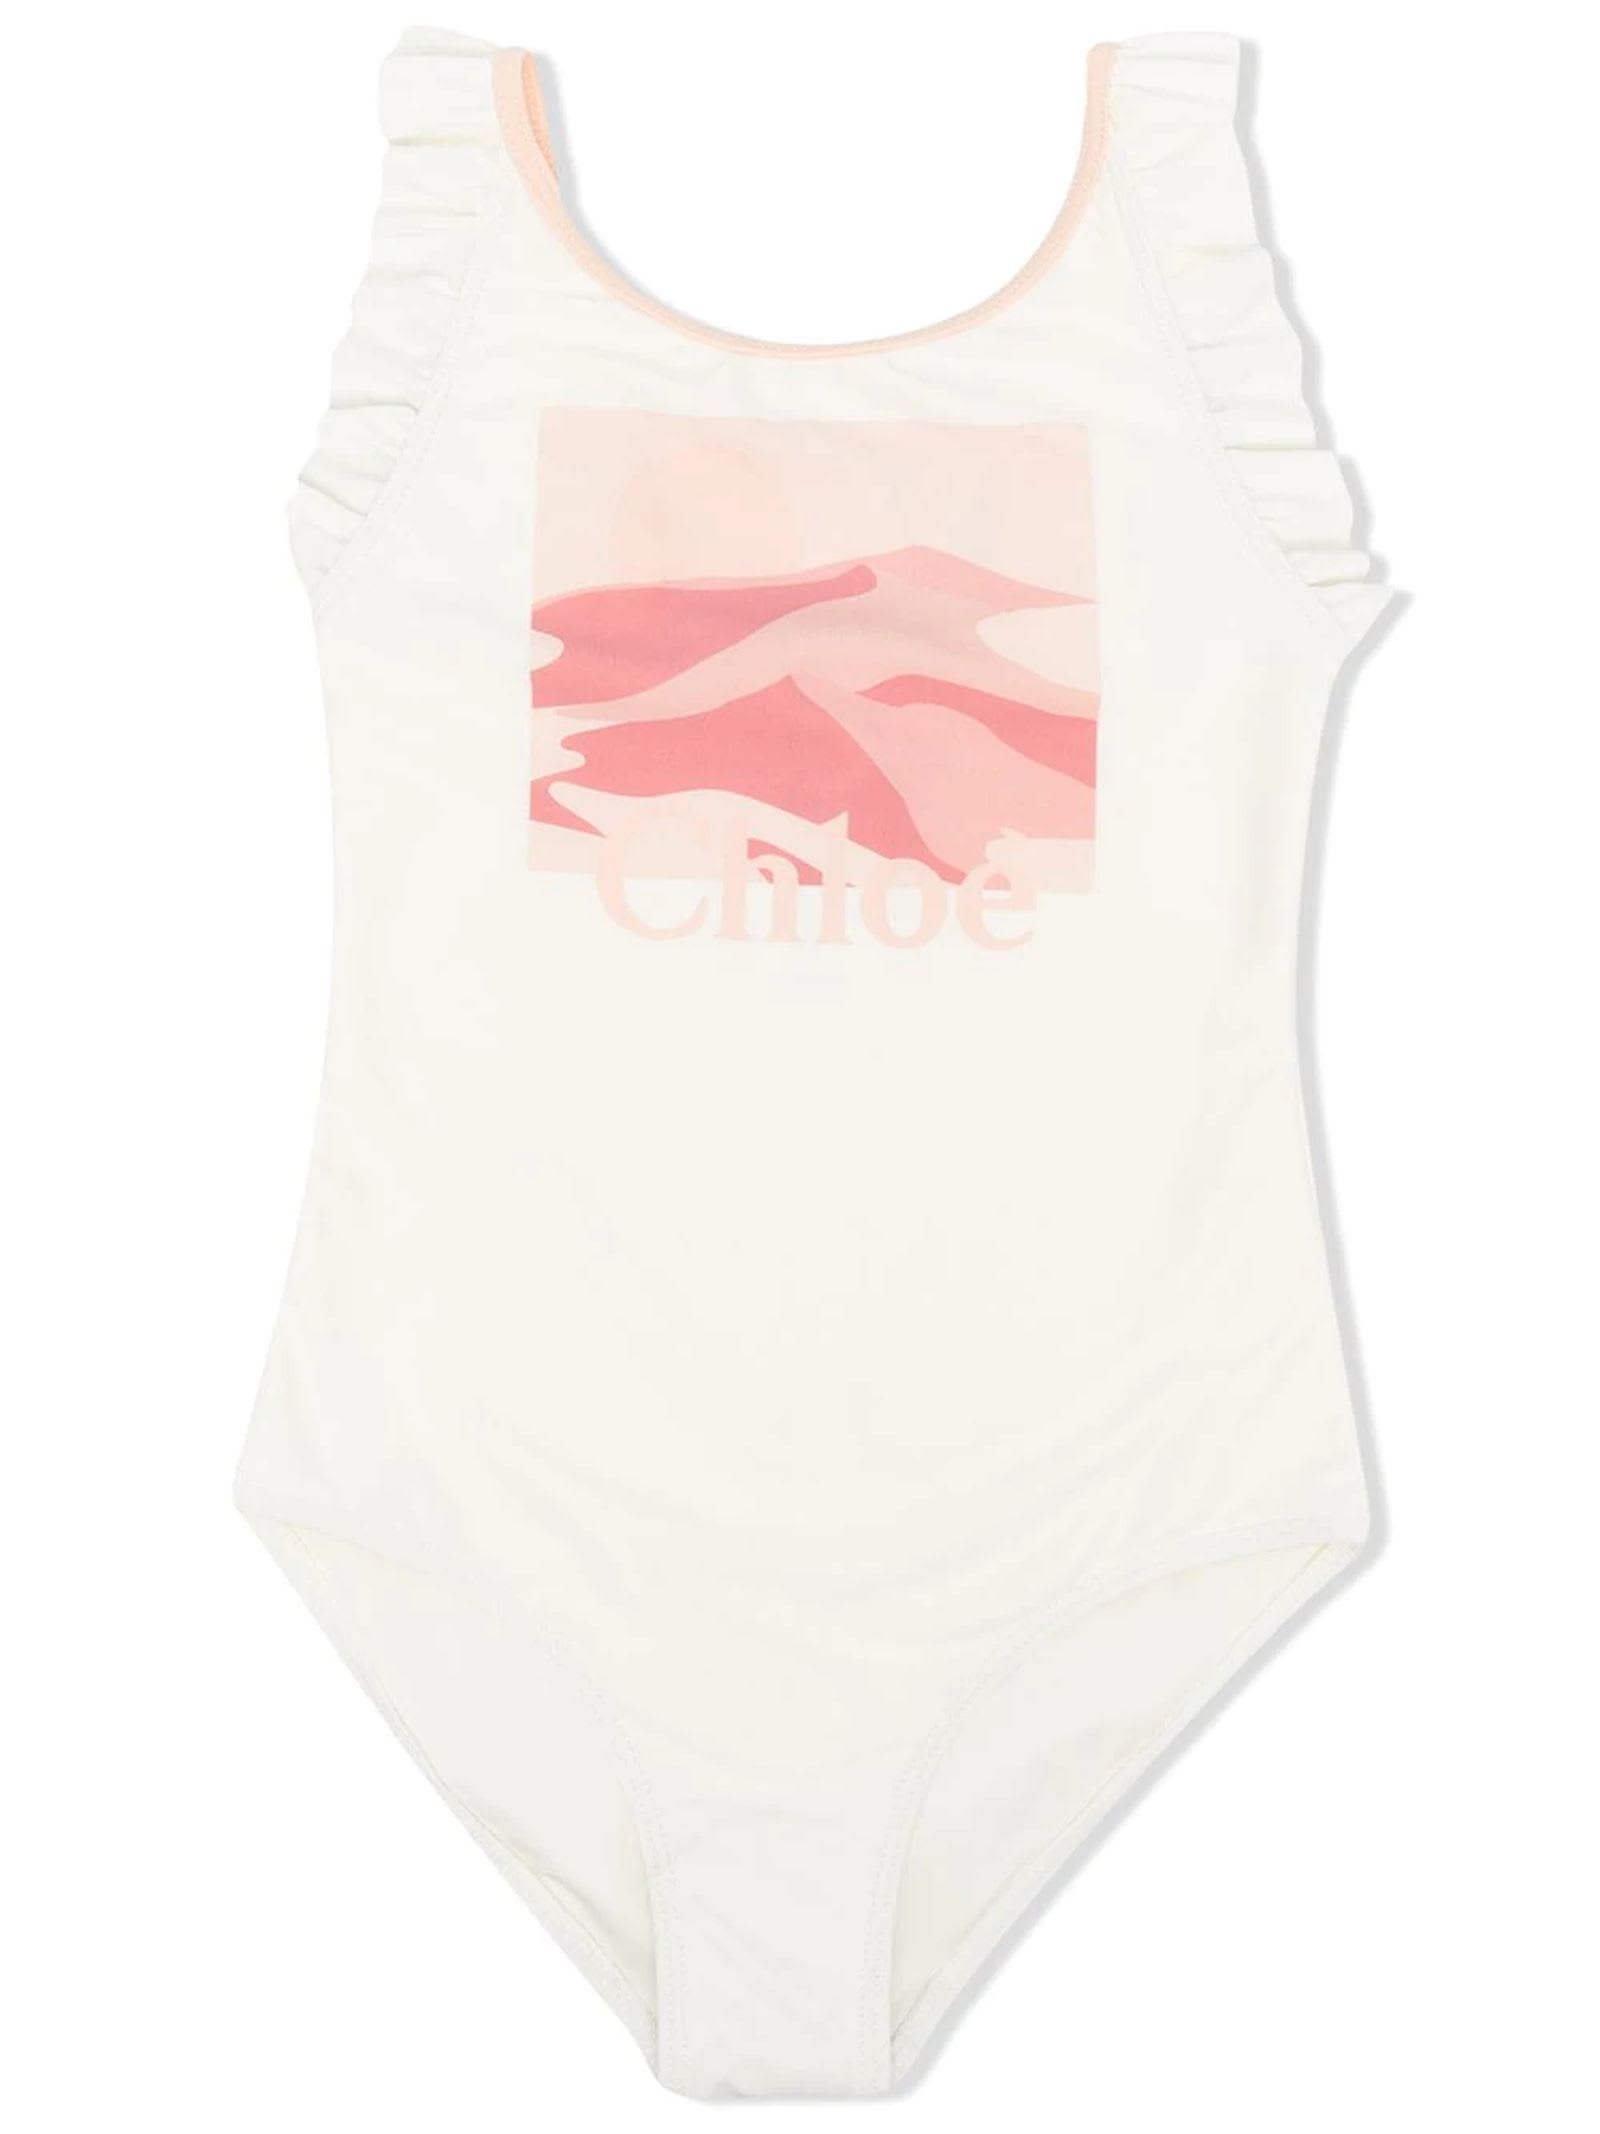 Chloé Cream And Light Pink Swimsuit